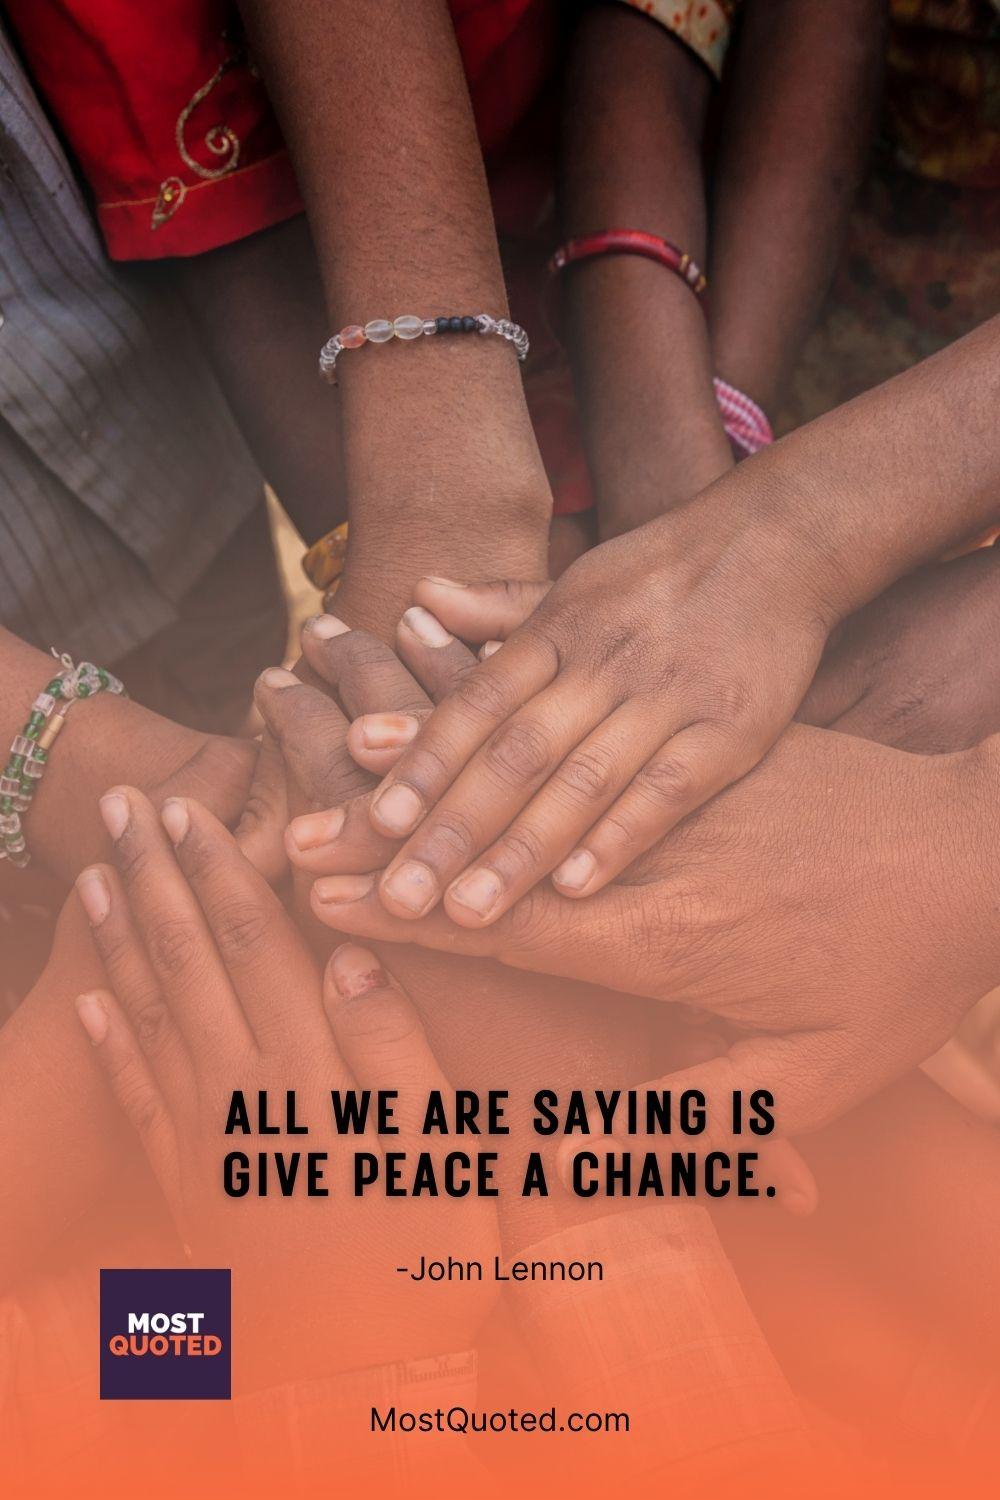 All we are saying is give peace a chance. - John Lennon